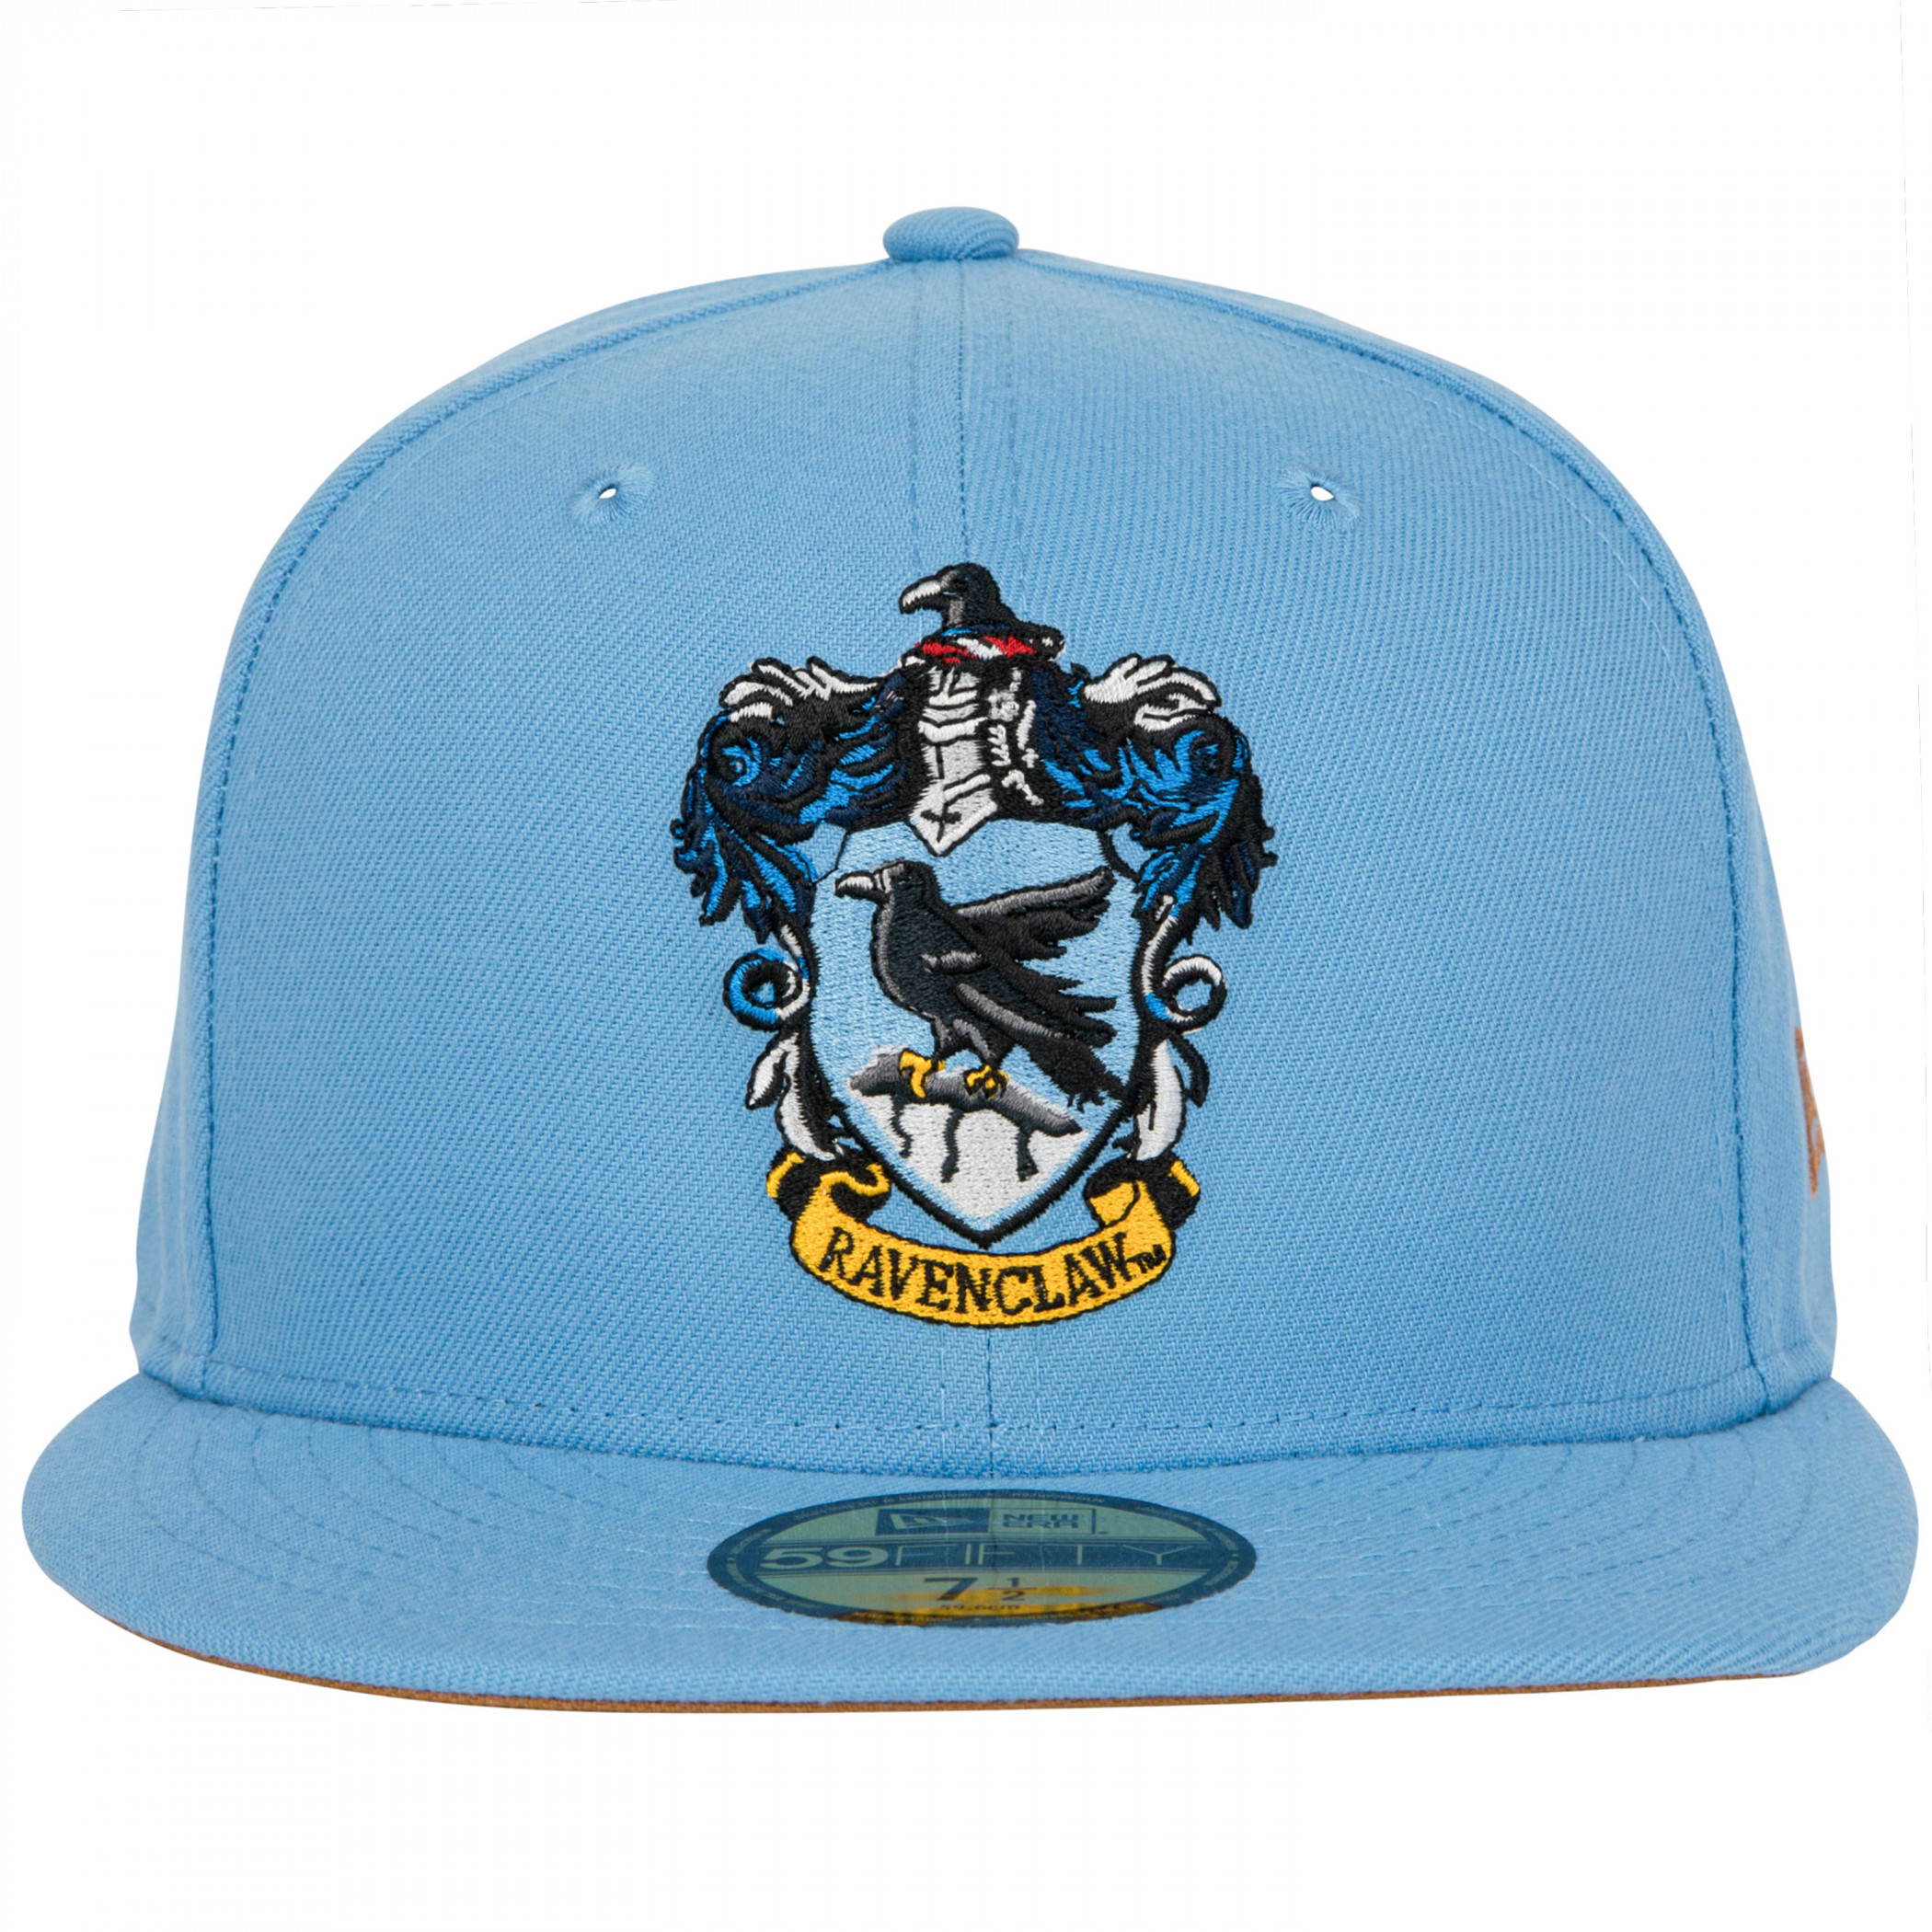 New Ravenclaw 59Fifty Potter Era Harry Hat House Fitted Crest